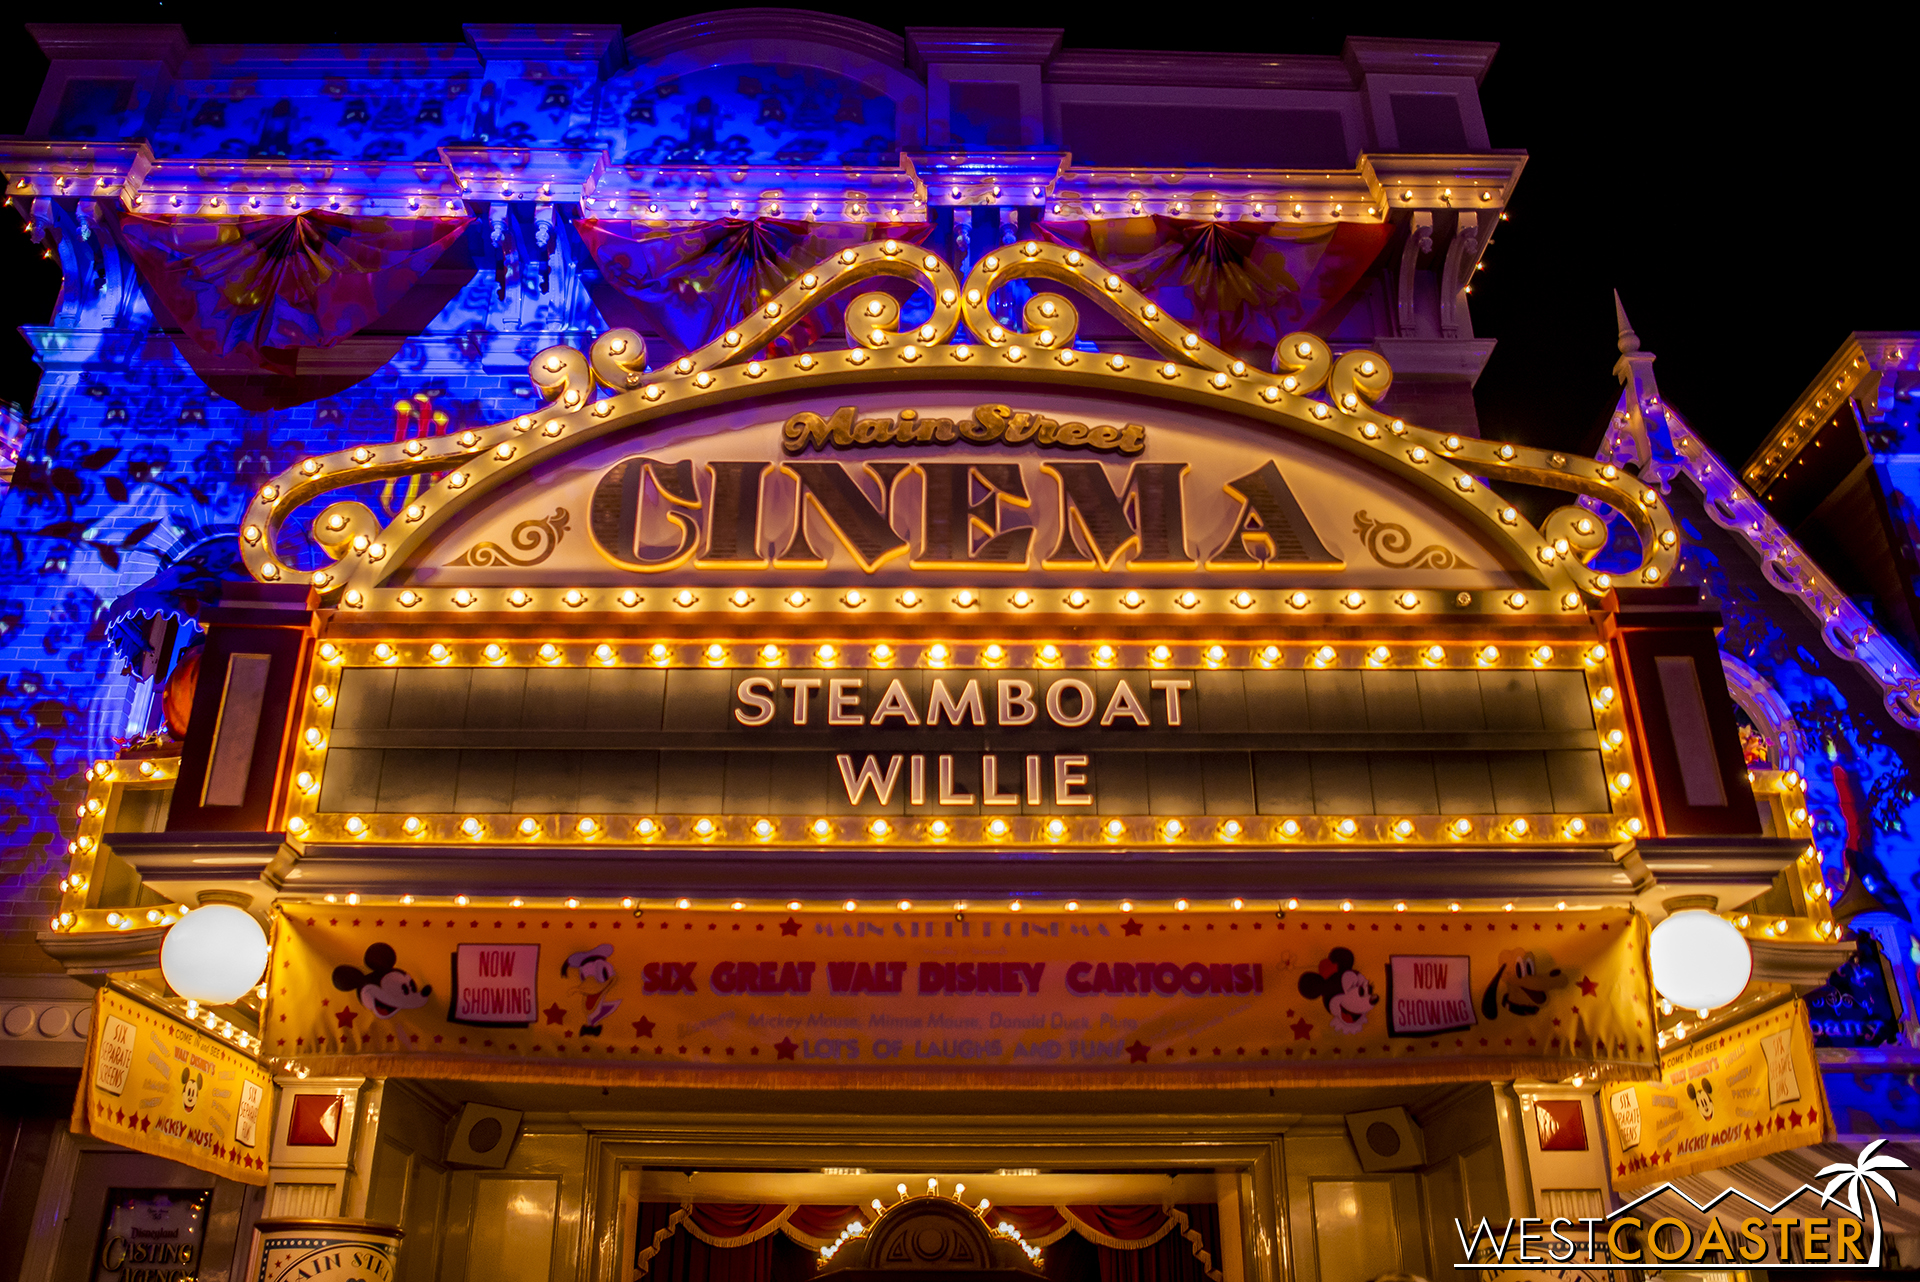  The projections on Main Street are back and just as charming as last year. 